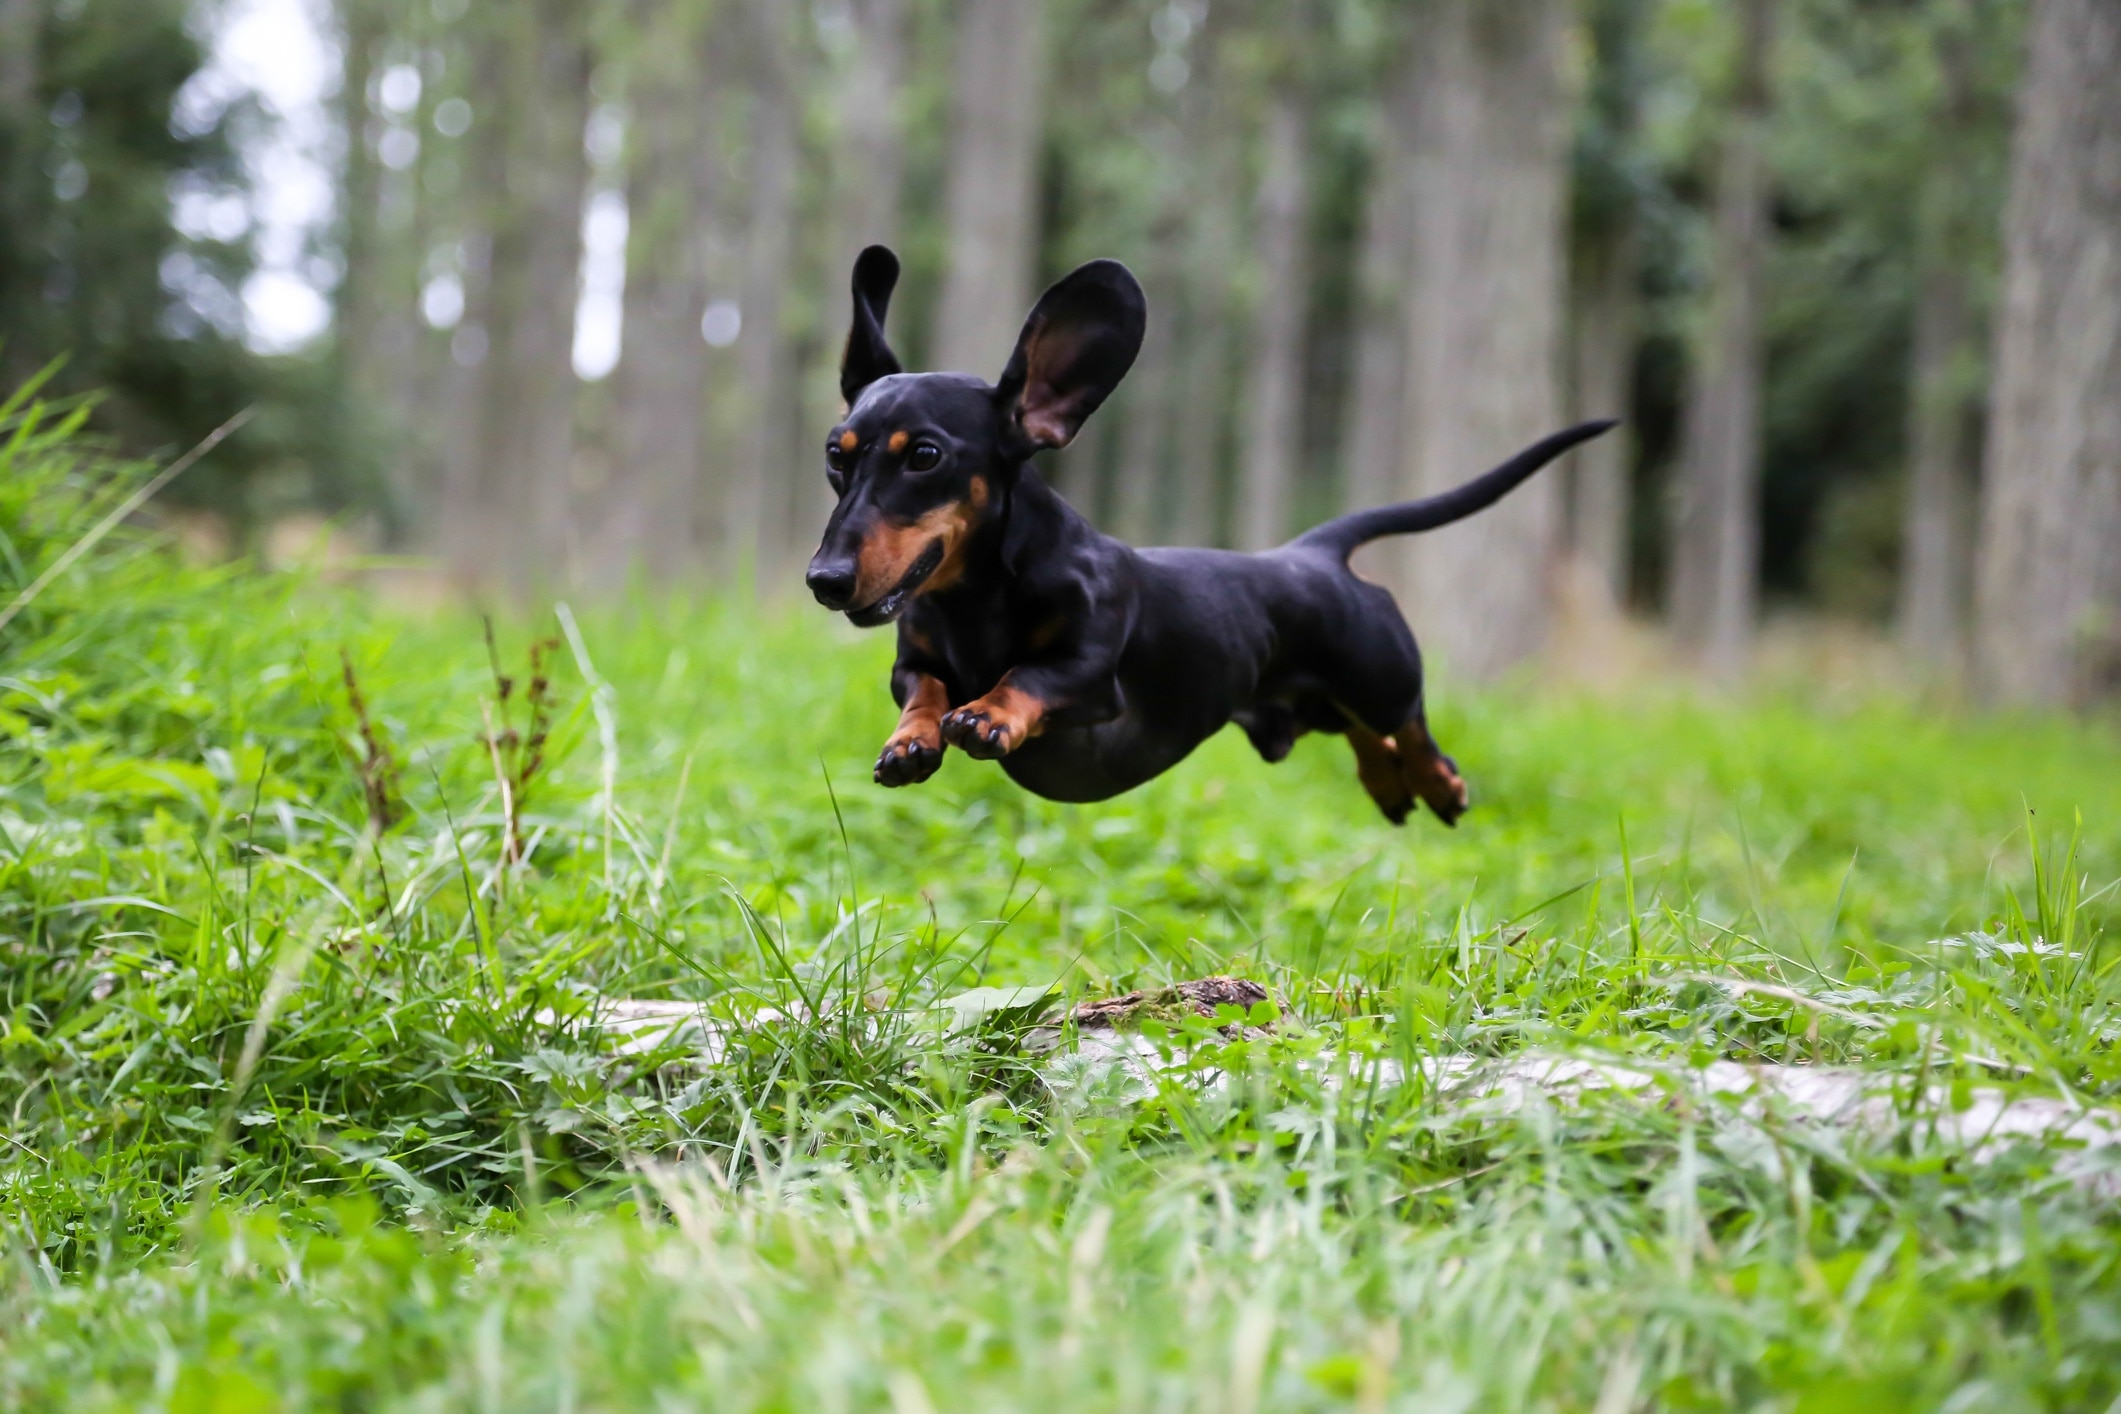 tricolor dachshund zooming across grass